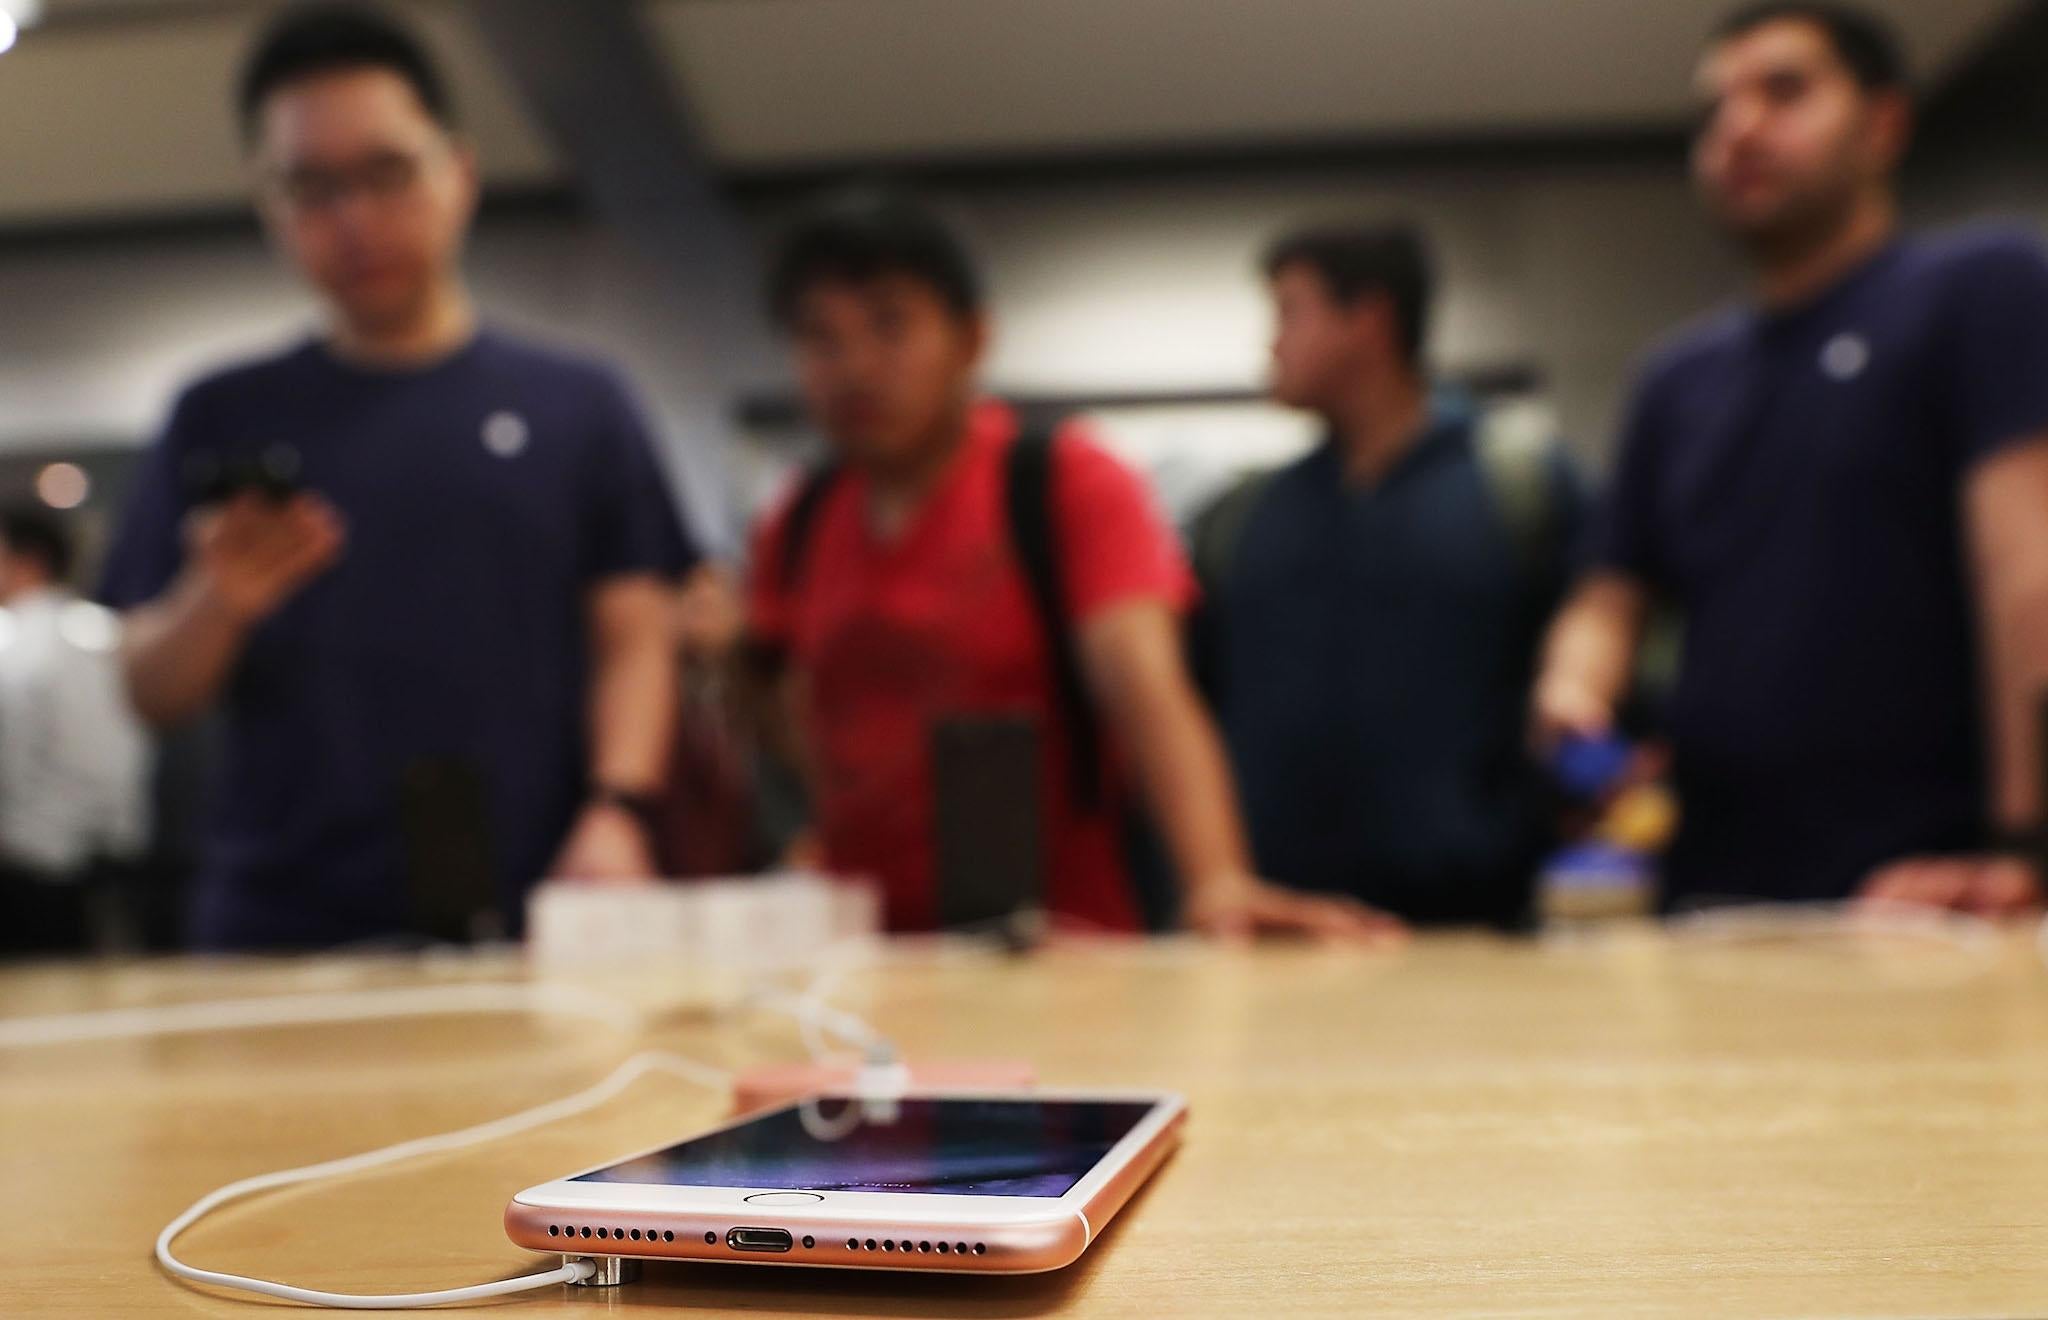 The new iPhone 7 is displayed on a table at an Apple store in Manhattan on September 16, 2016 in New York City